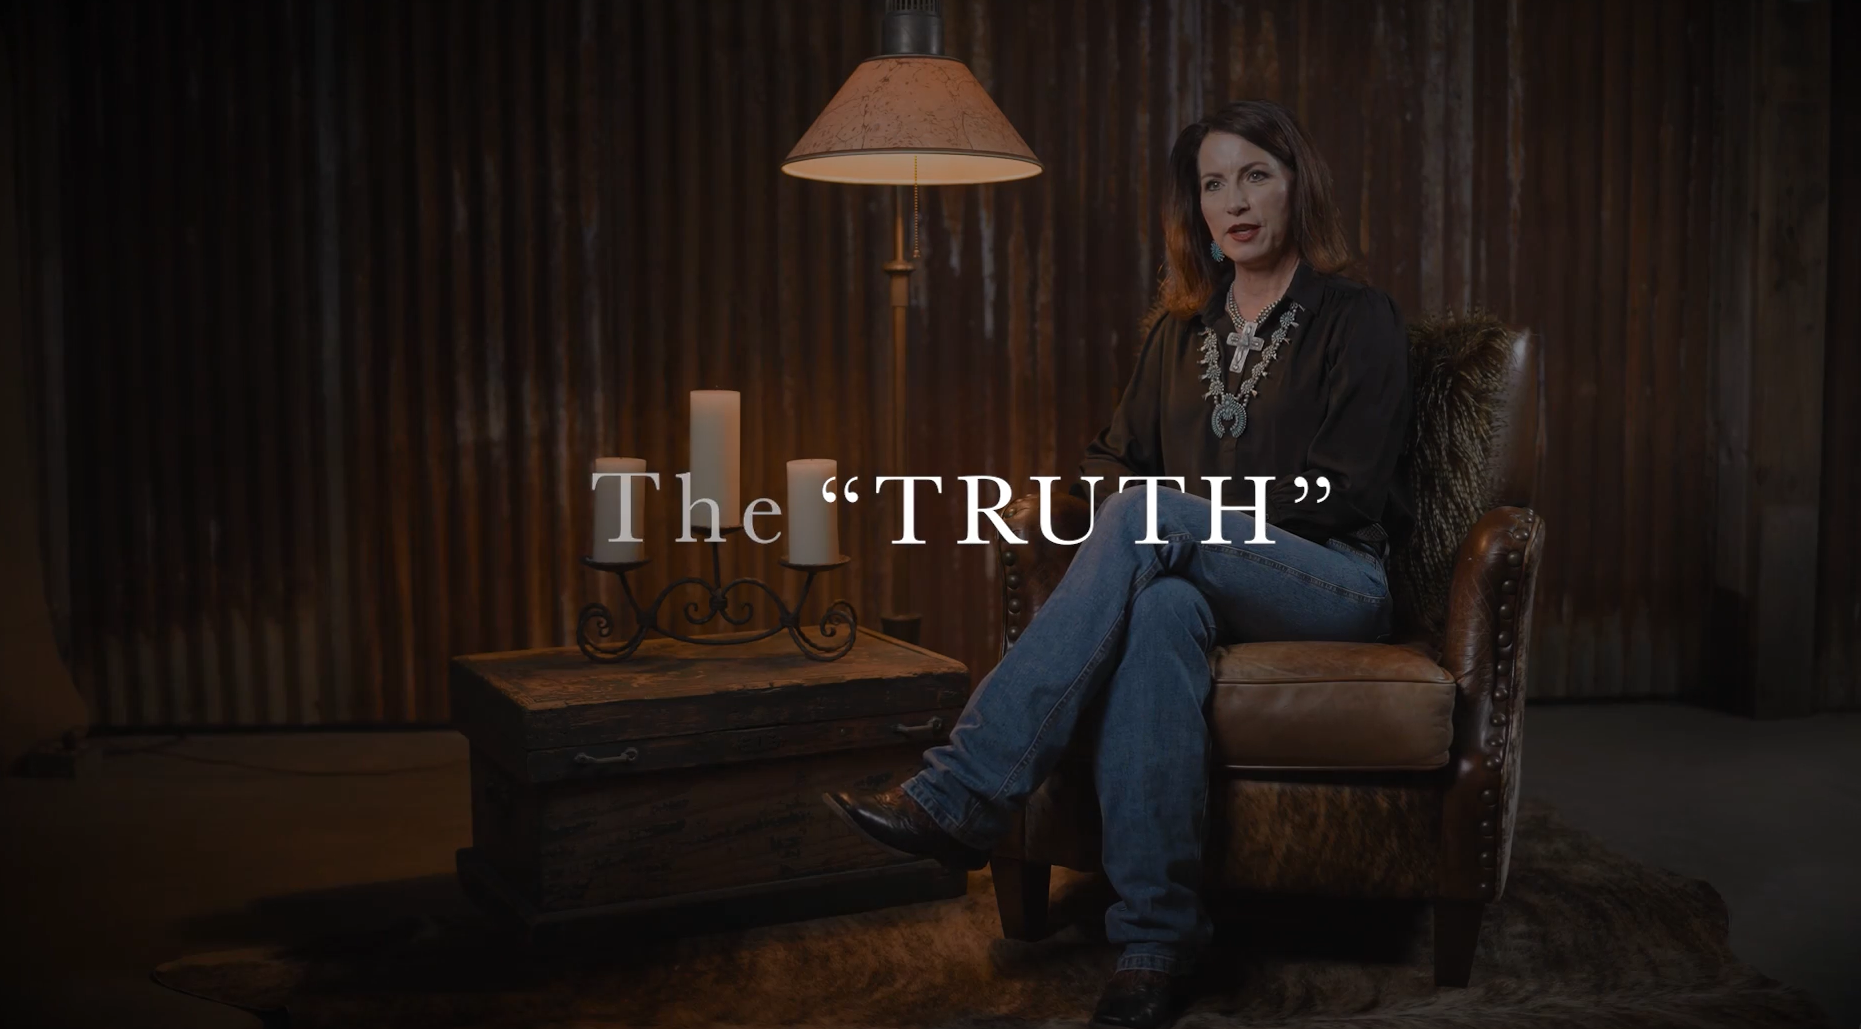 Sexual Abuse Survivors are Exposing Secretive Religous Group: “The Truth”